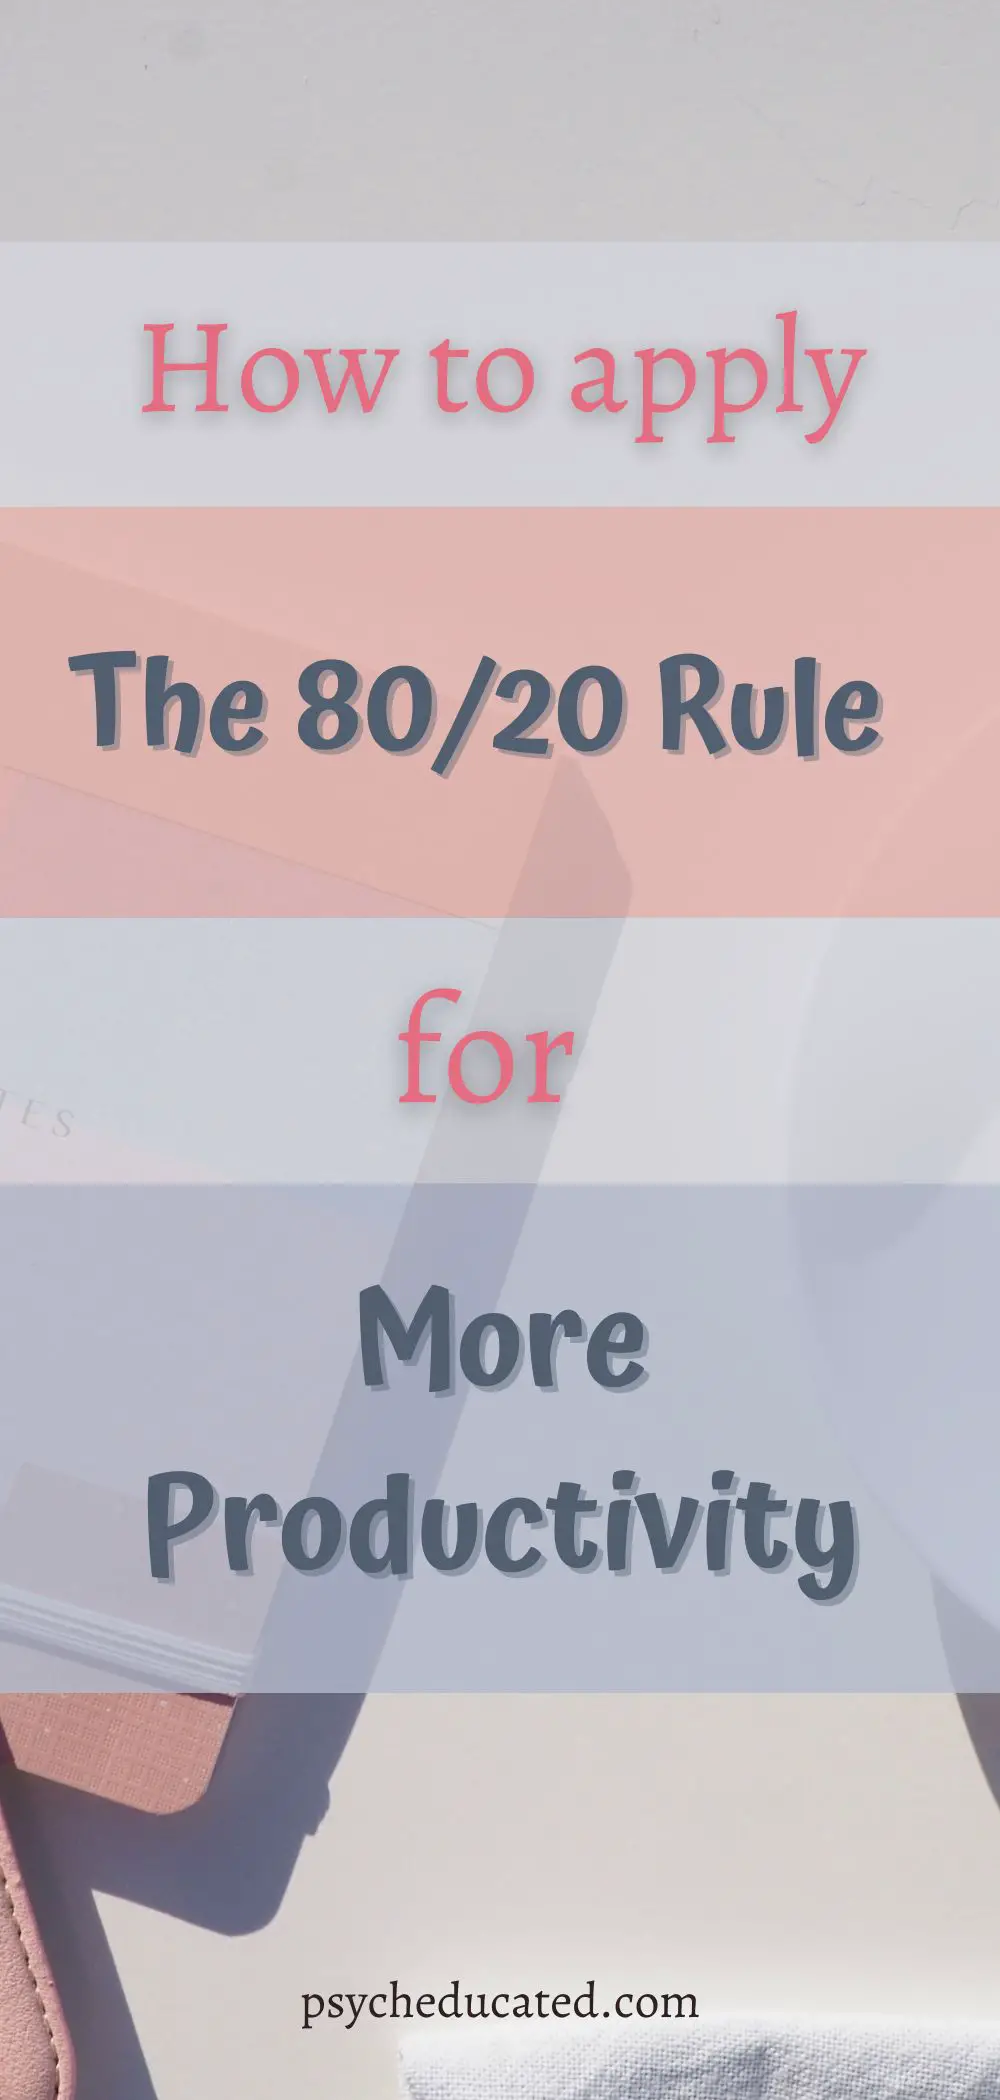 How to apply the 80/20 principle for more productivity